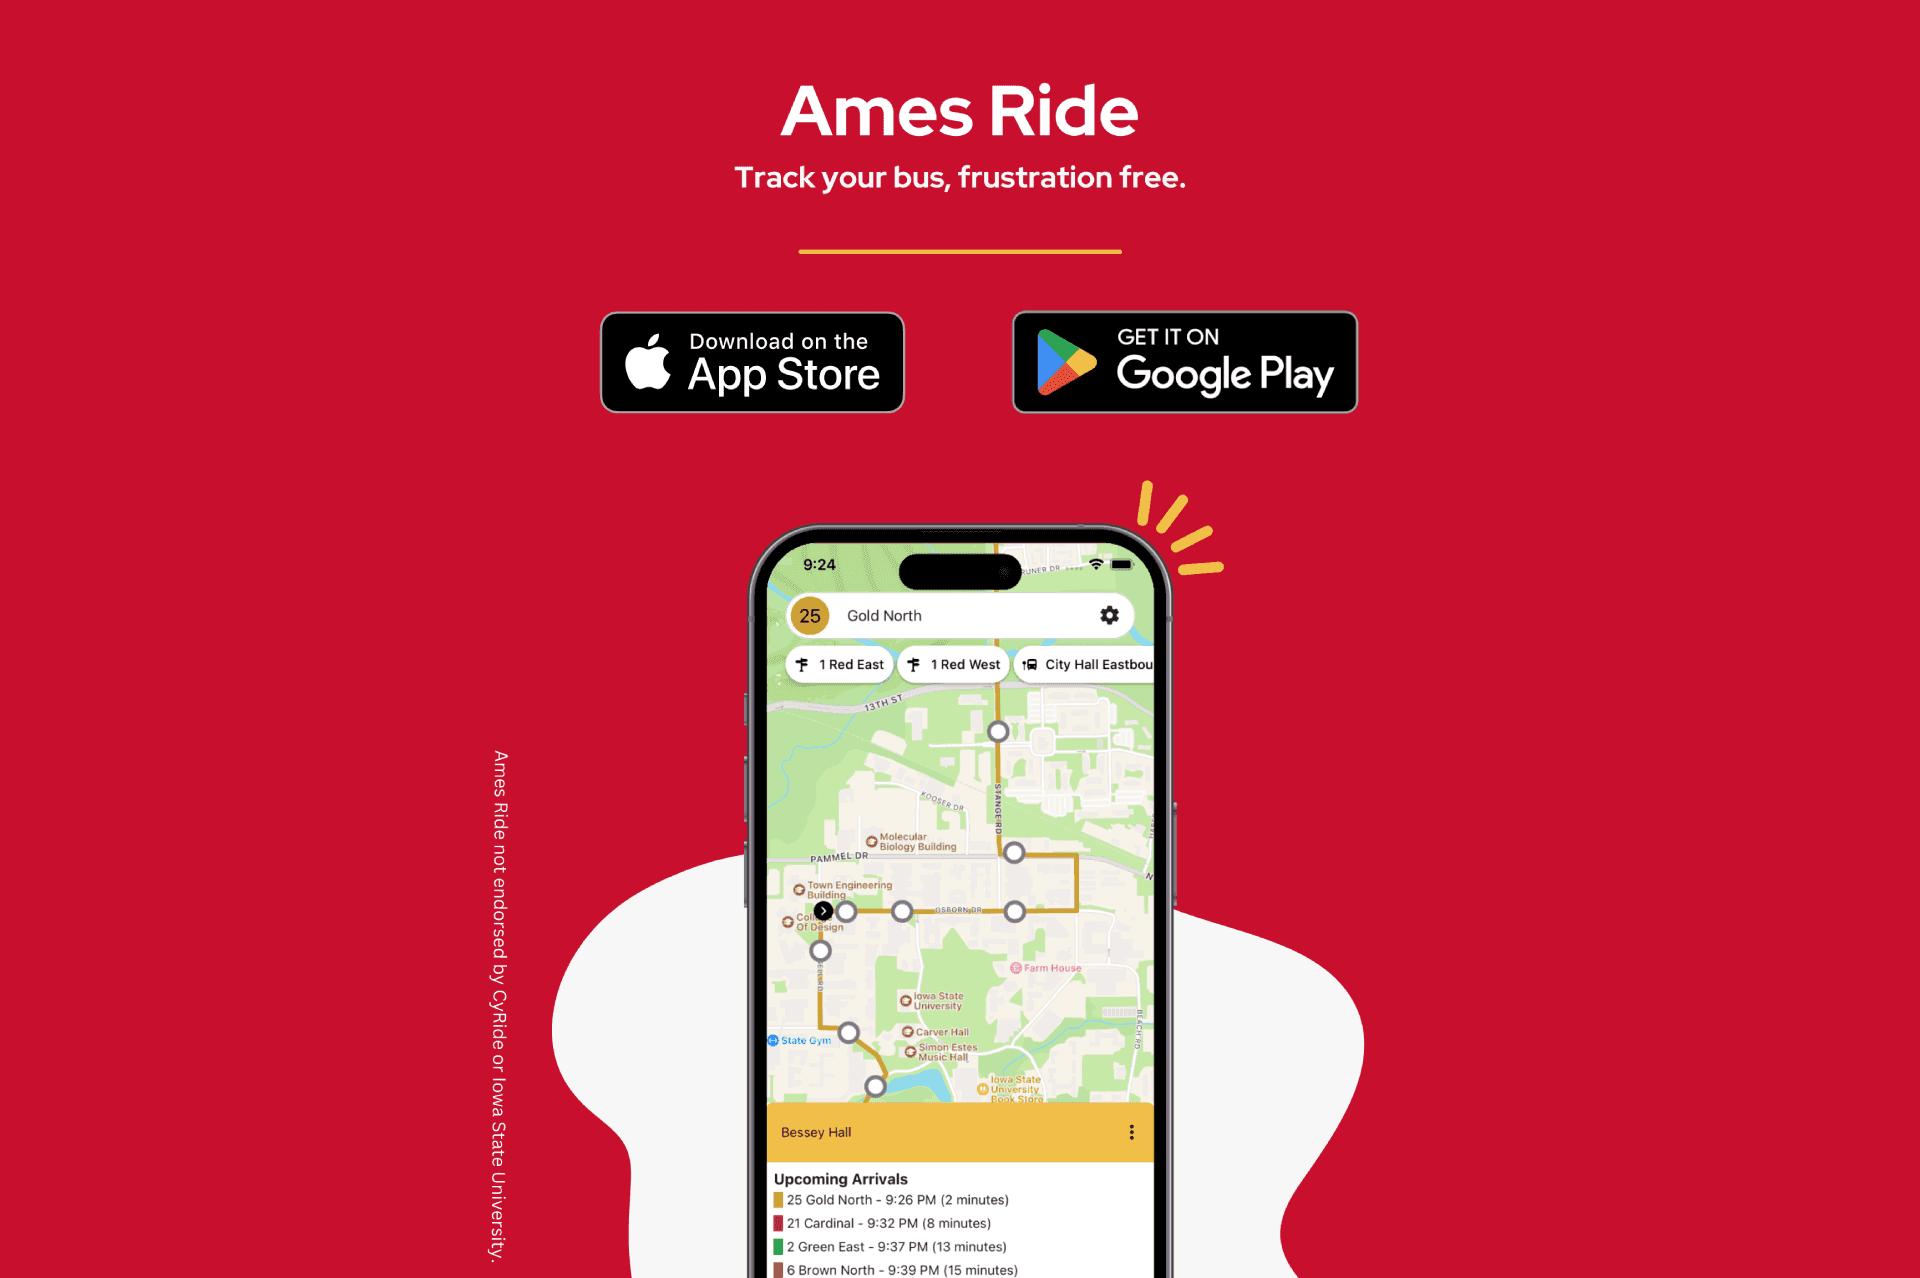 Ames Ride promotional graphic.